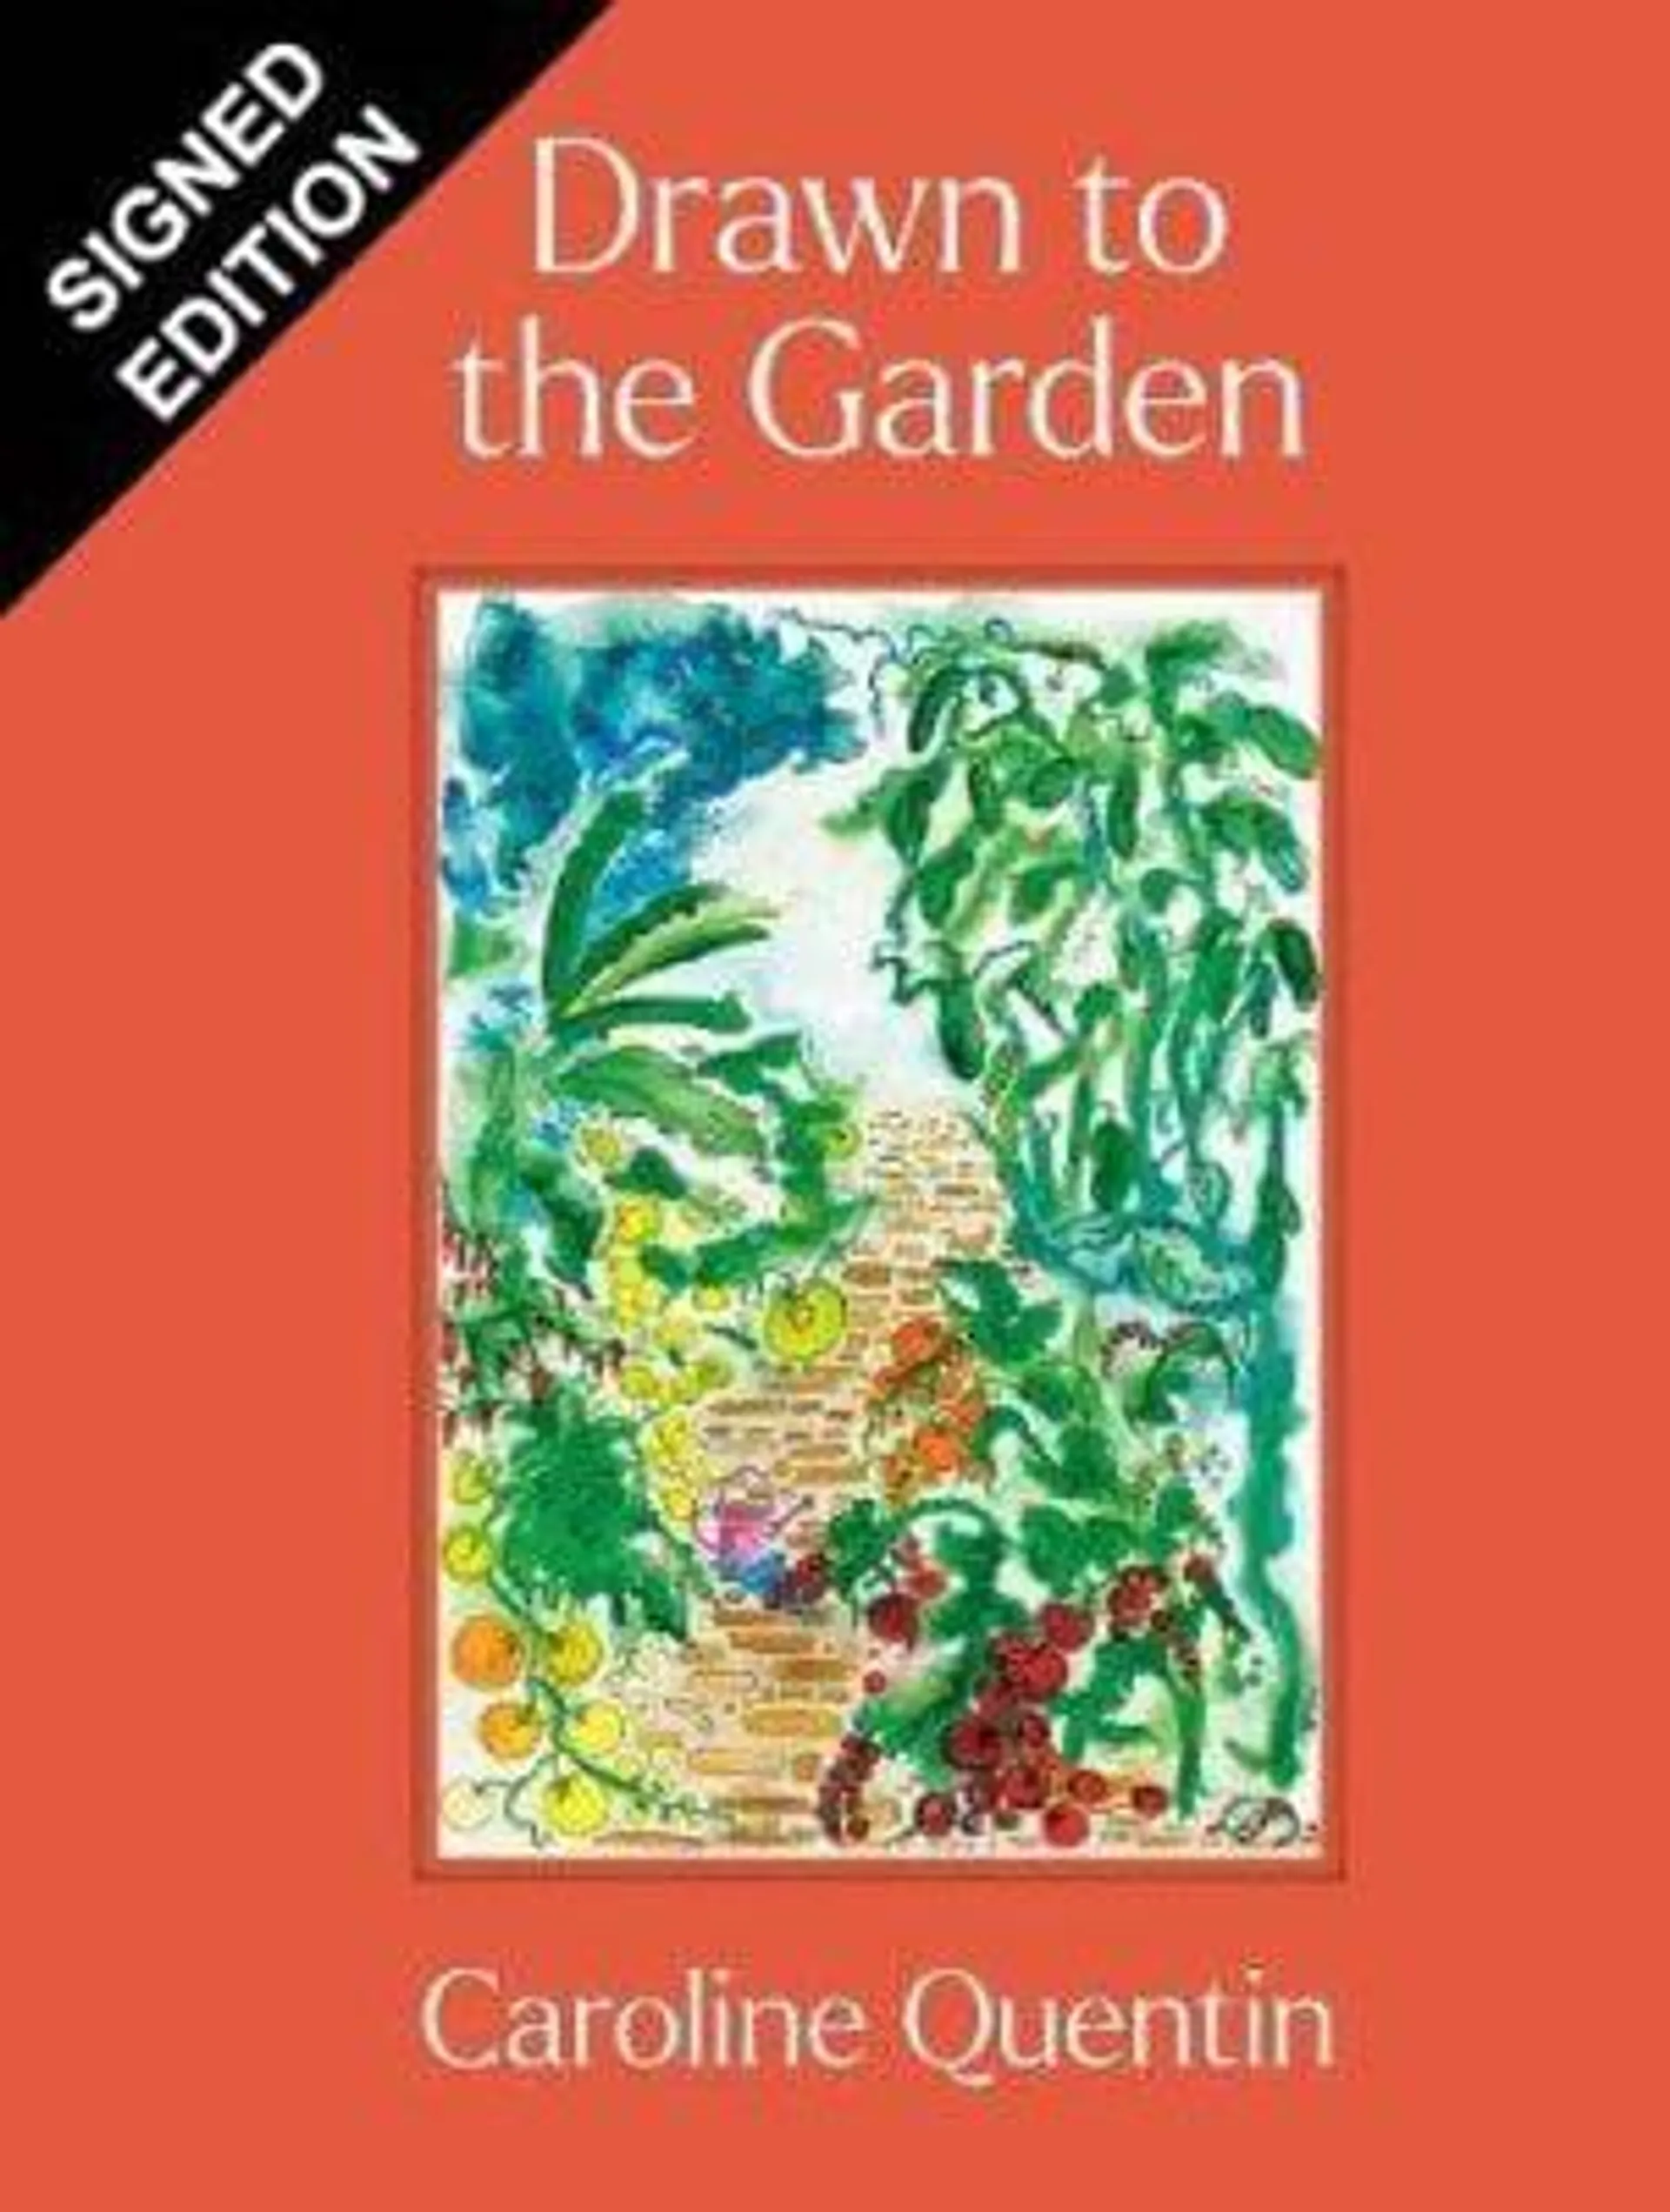 Drawn to the Garden: Signed Edition (Hardback)